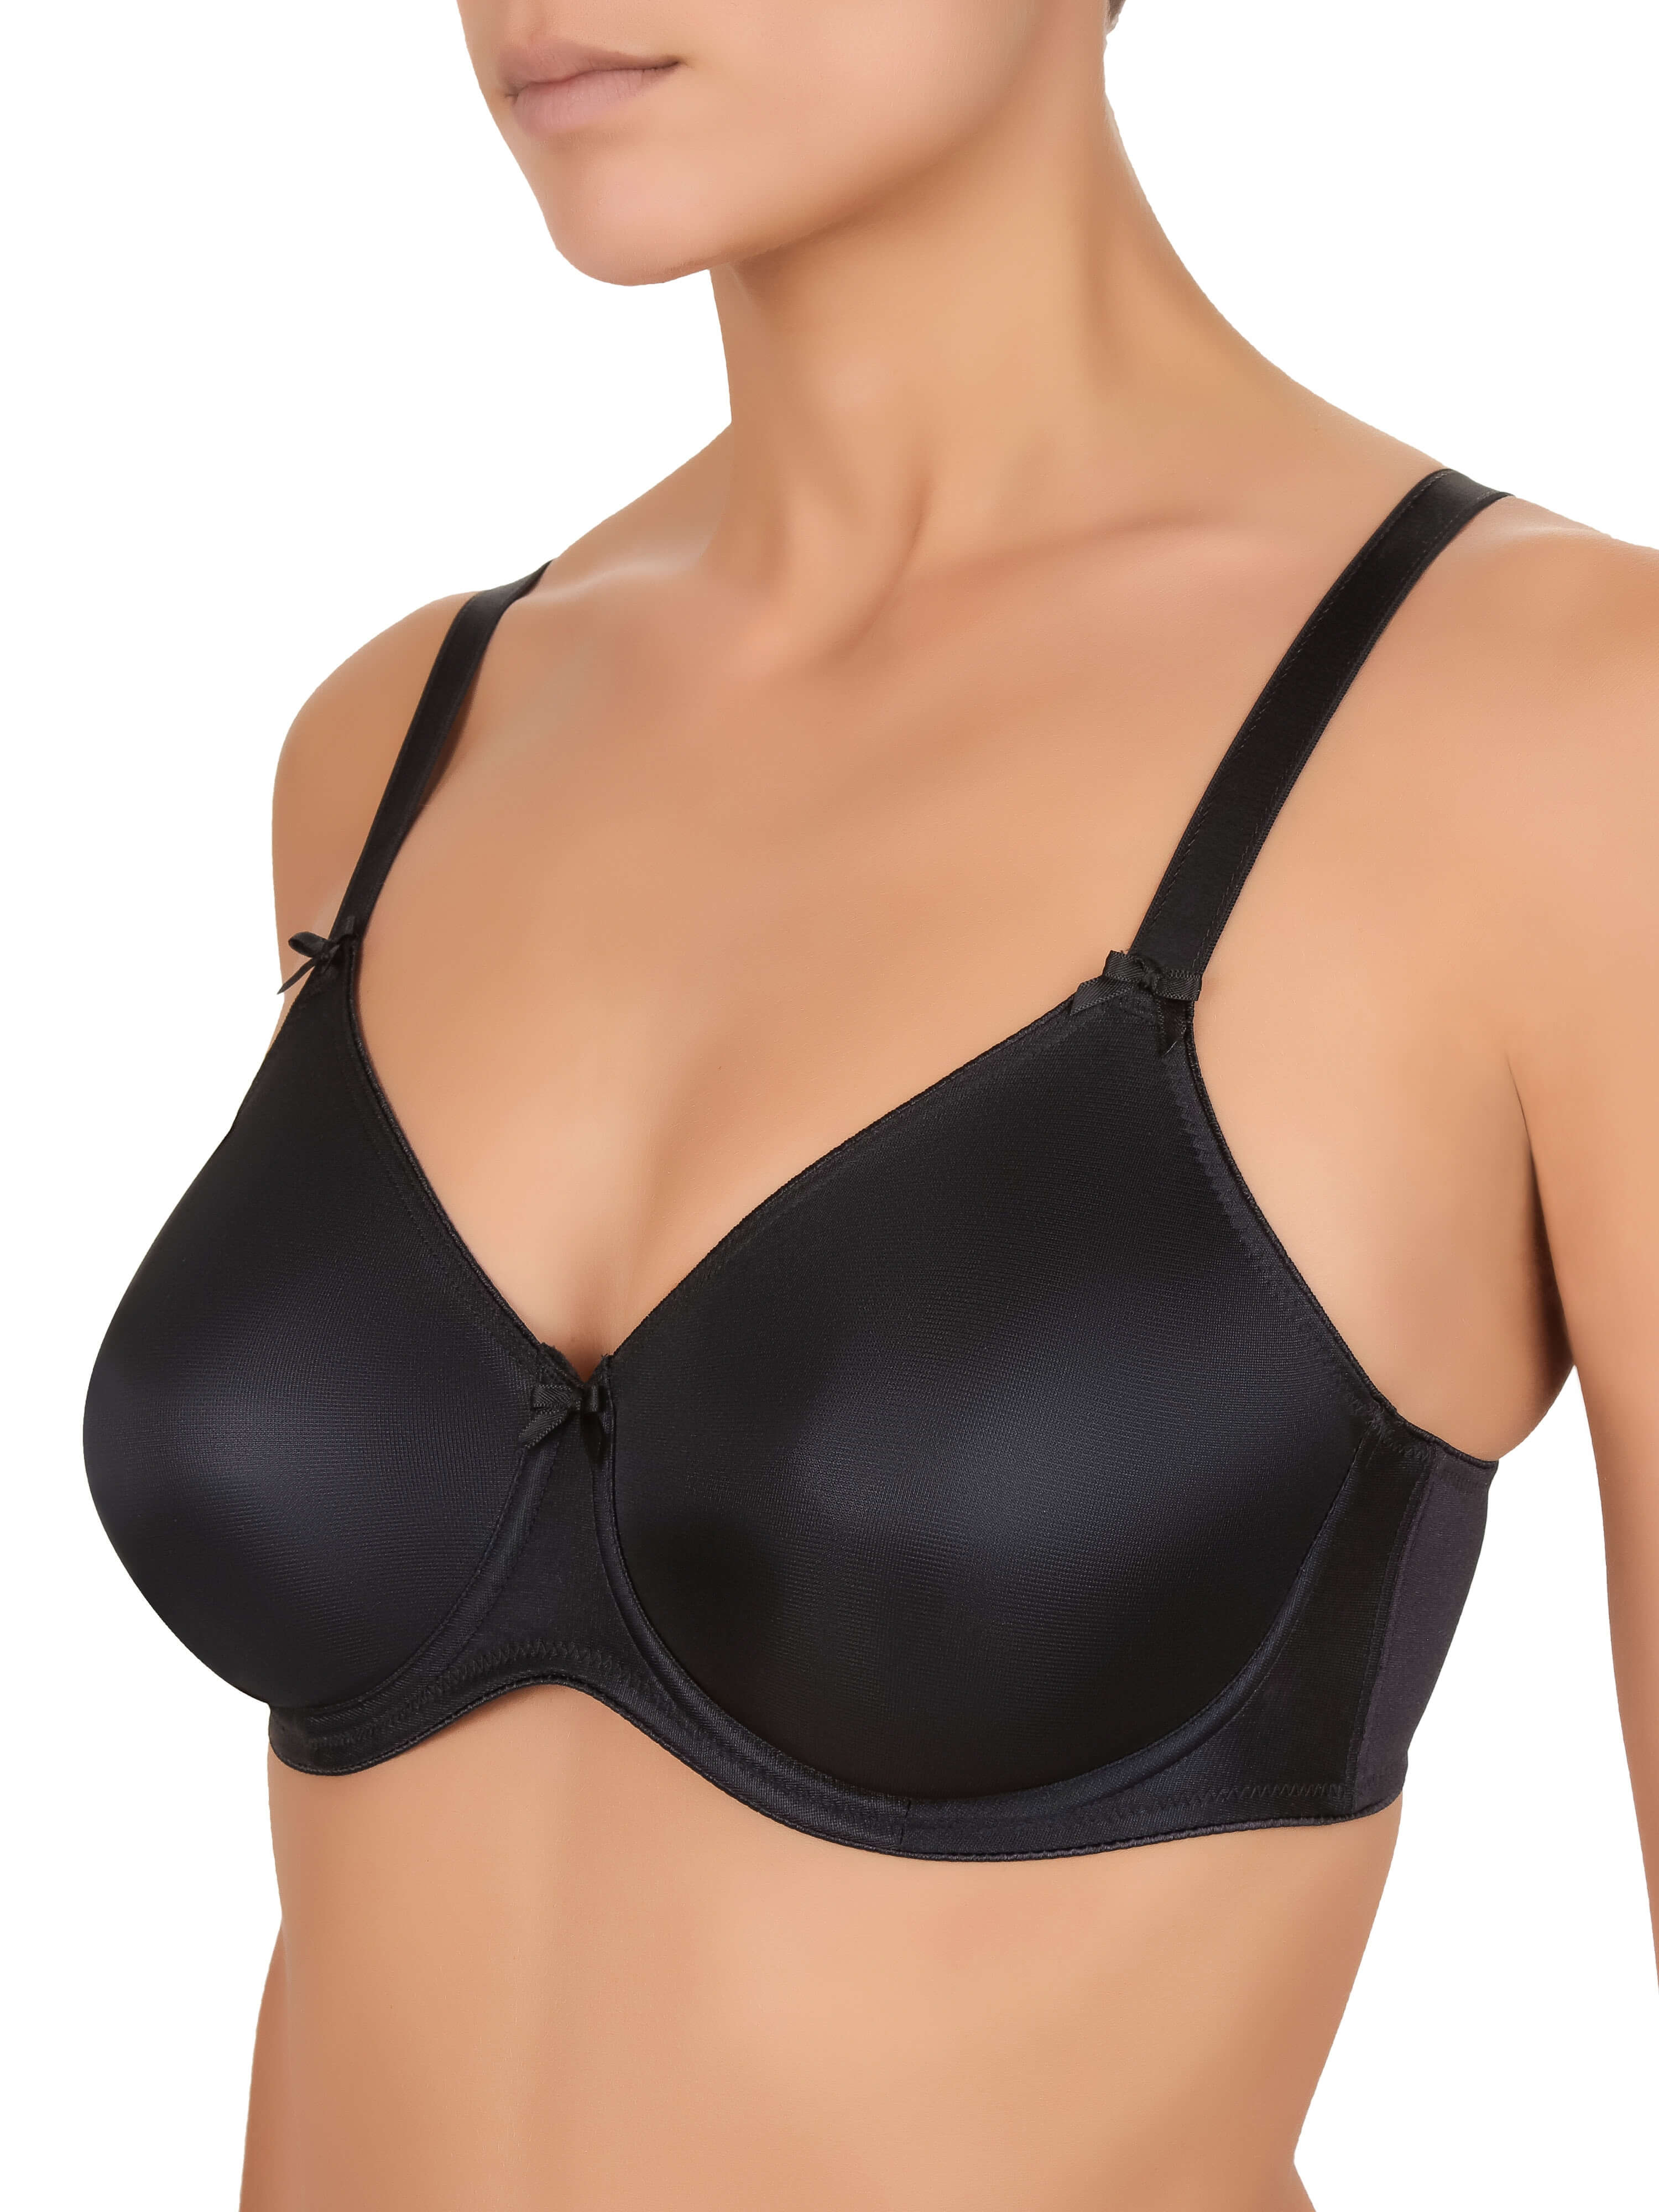 Underwired bra from the Moments collection by Félina blue